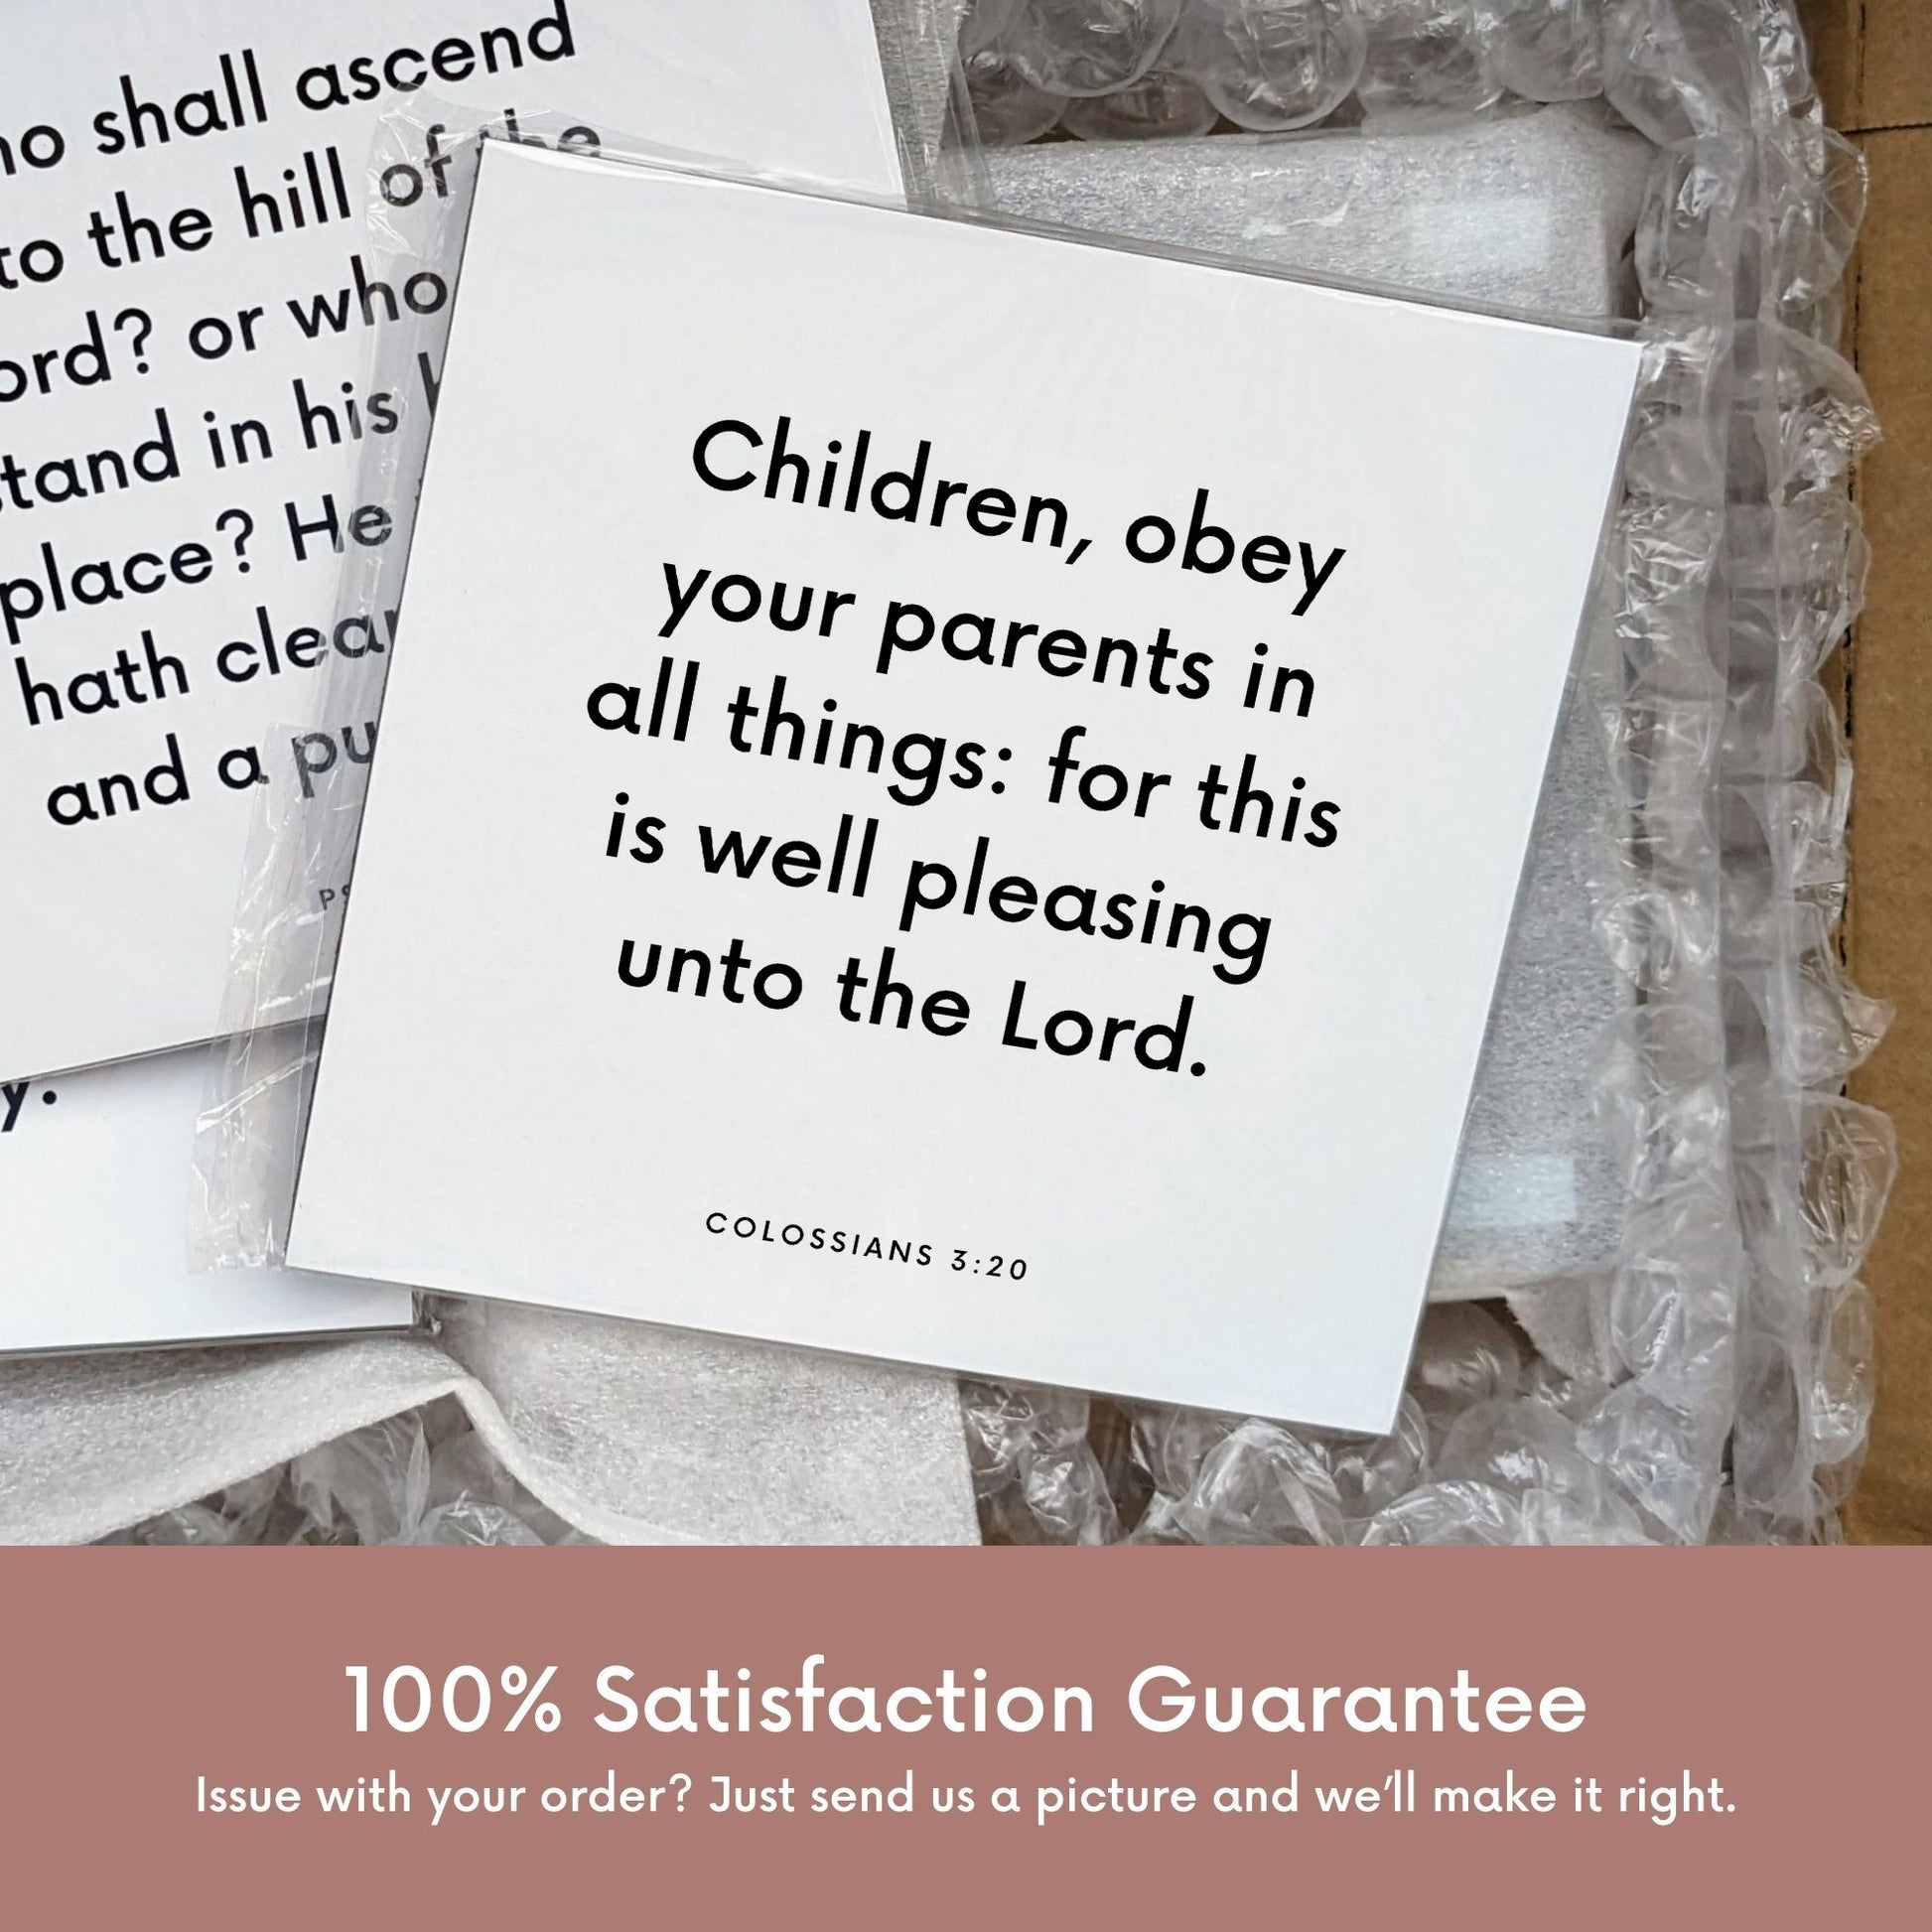 Shipping materials for scripture tile of Colossians 3:20 - "Children, obey your parents in all things"